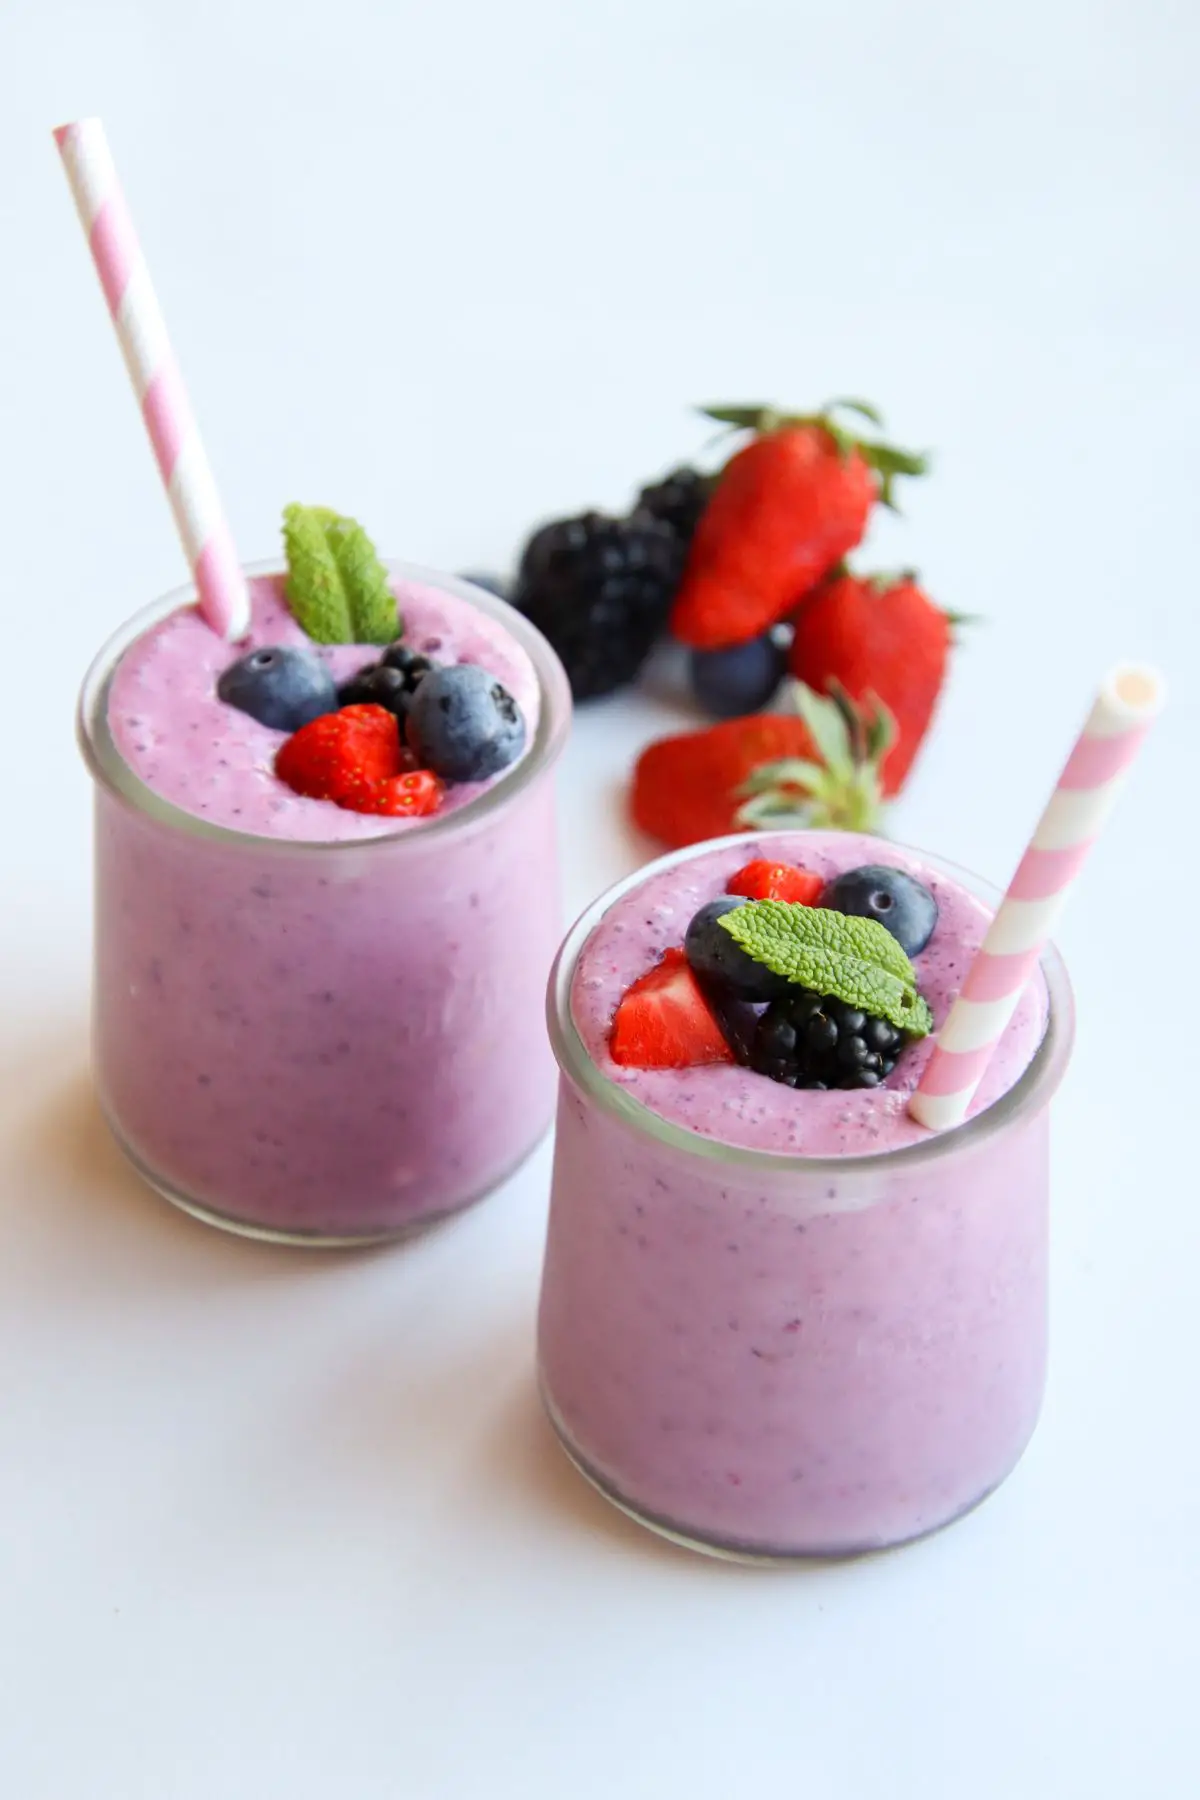 How To Make A Good Smoothie With Frozen Fruit And Water (3 Recipes)